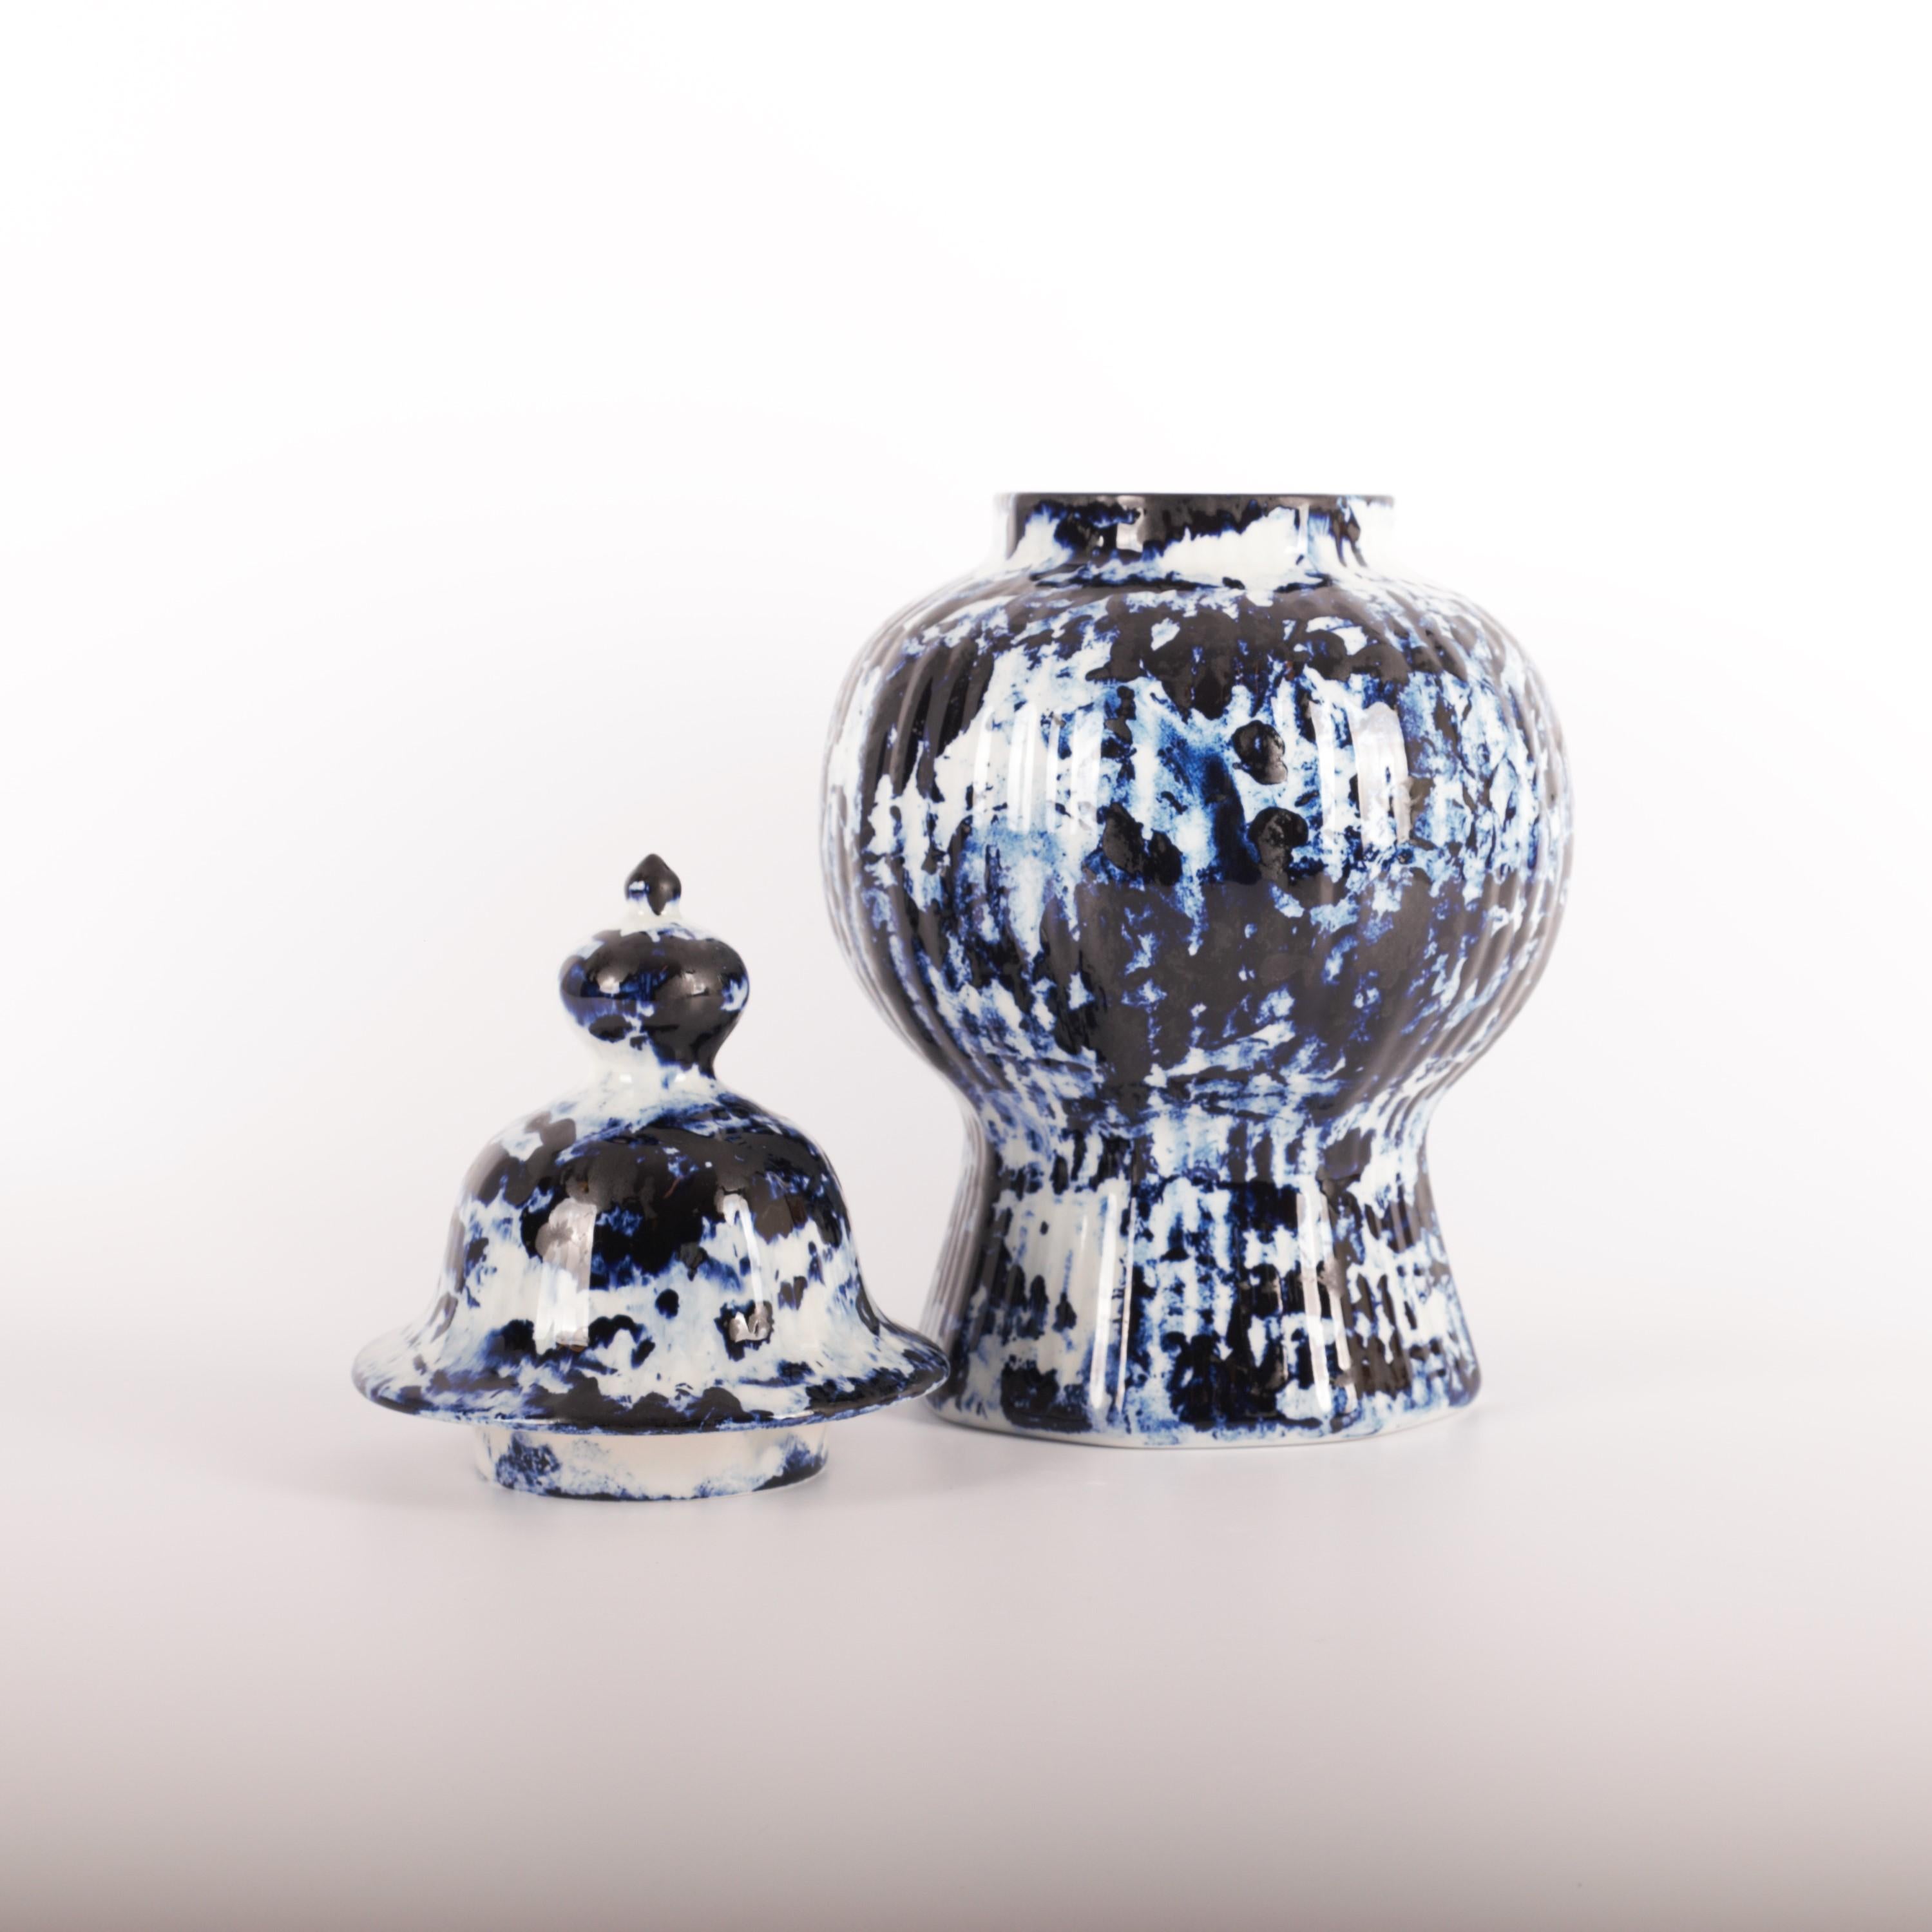 Glazed Delft Blue Vase with Lid 37cm #2, by Marcel Wanders, Hand Painted, 2006, Unique For Sale